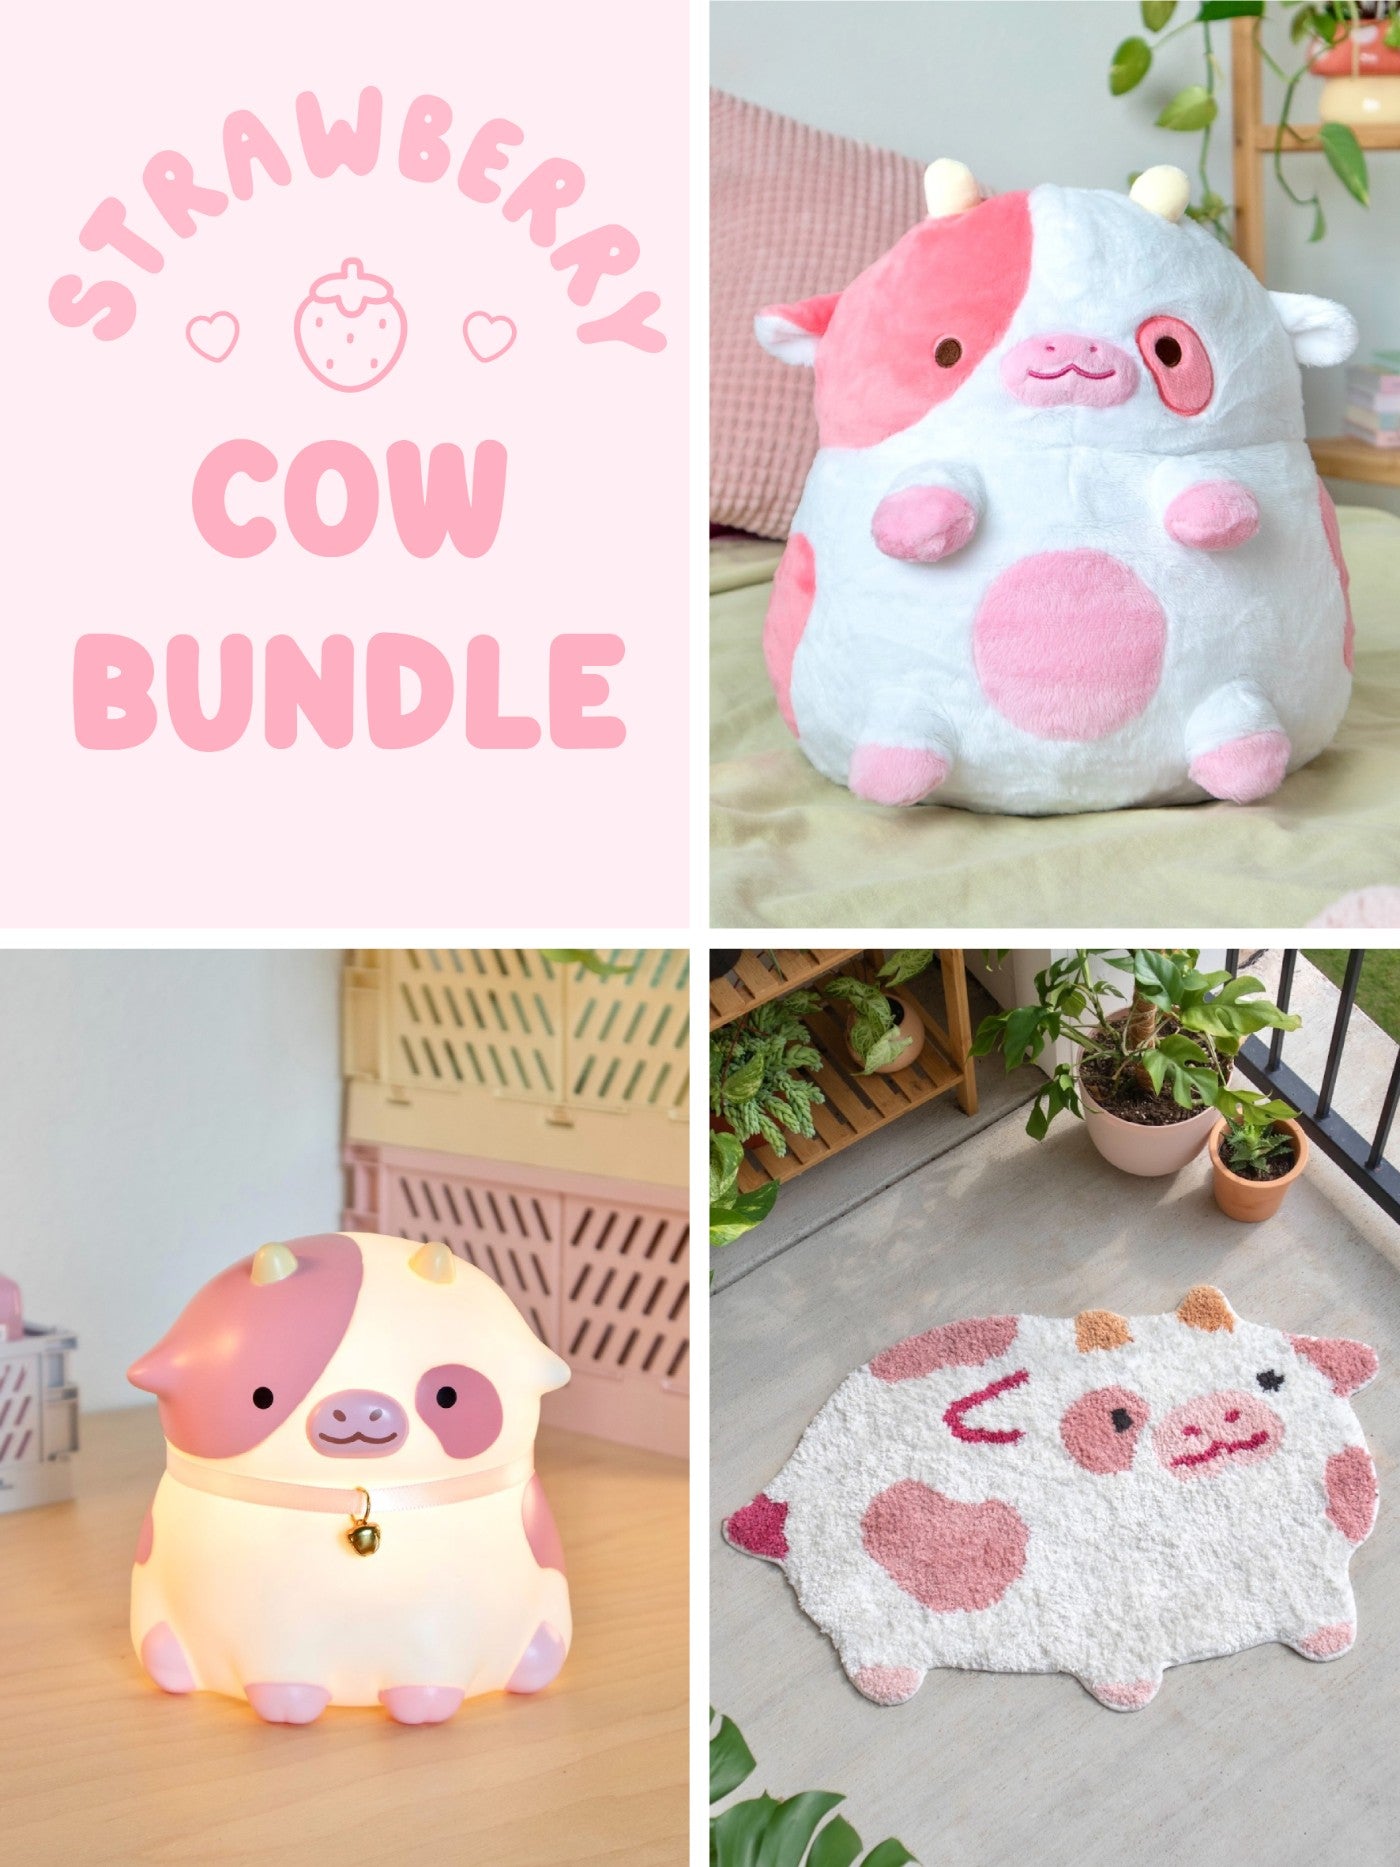 Strawberry Cow Cute Cow Pink Cow Pet by Levi Trinity